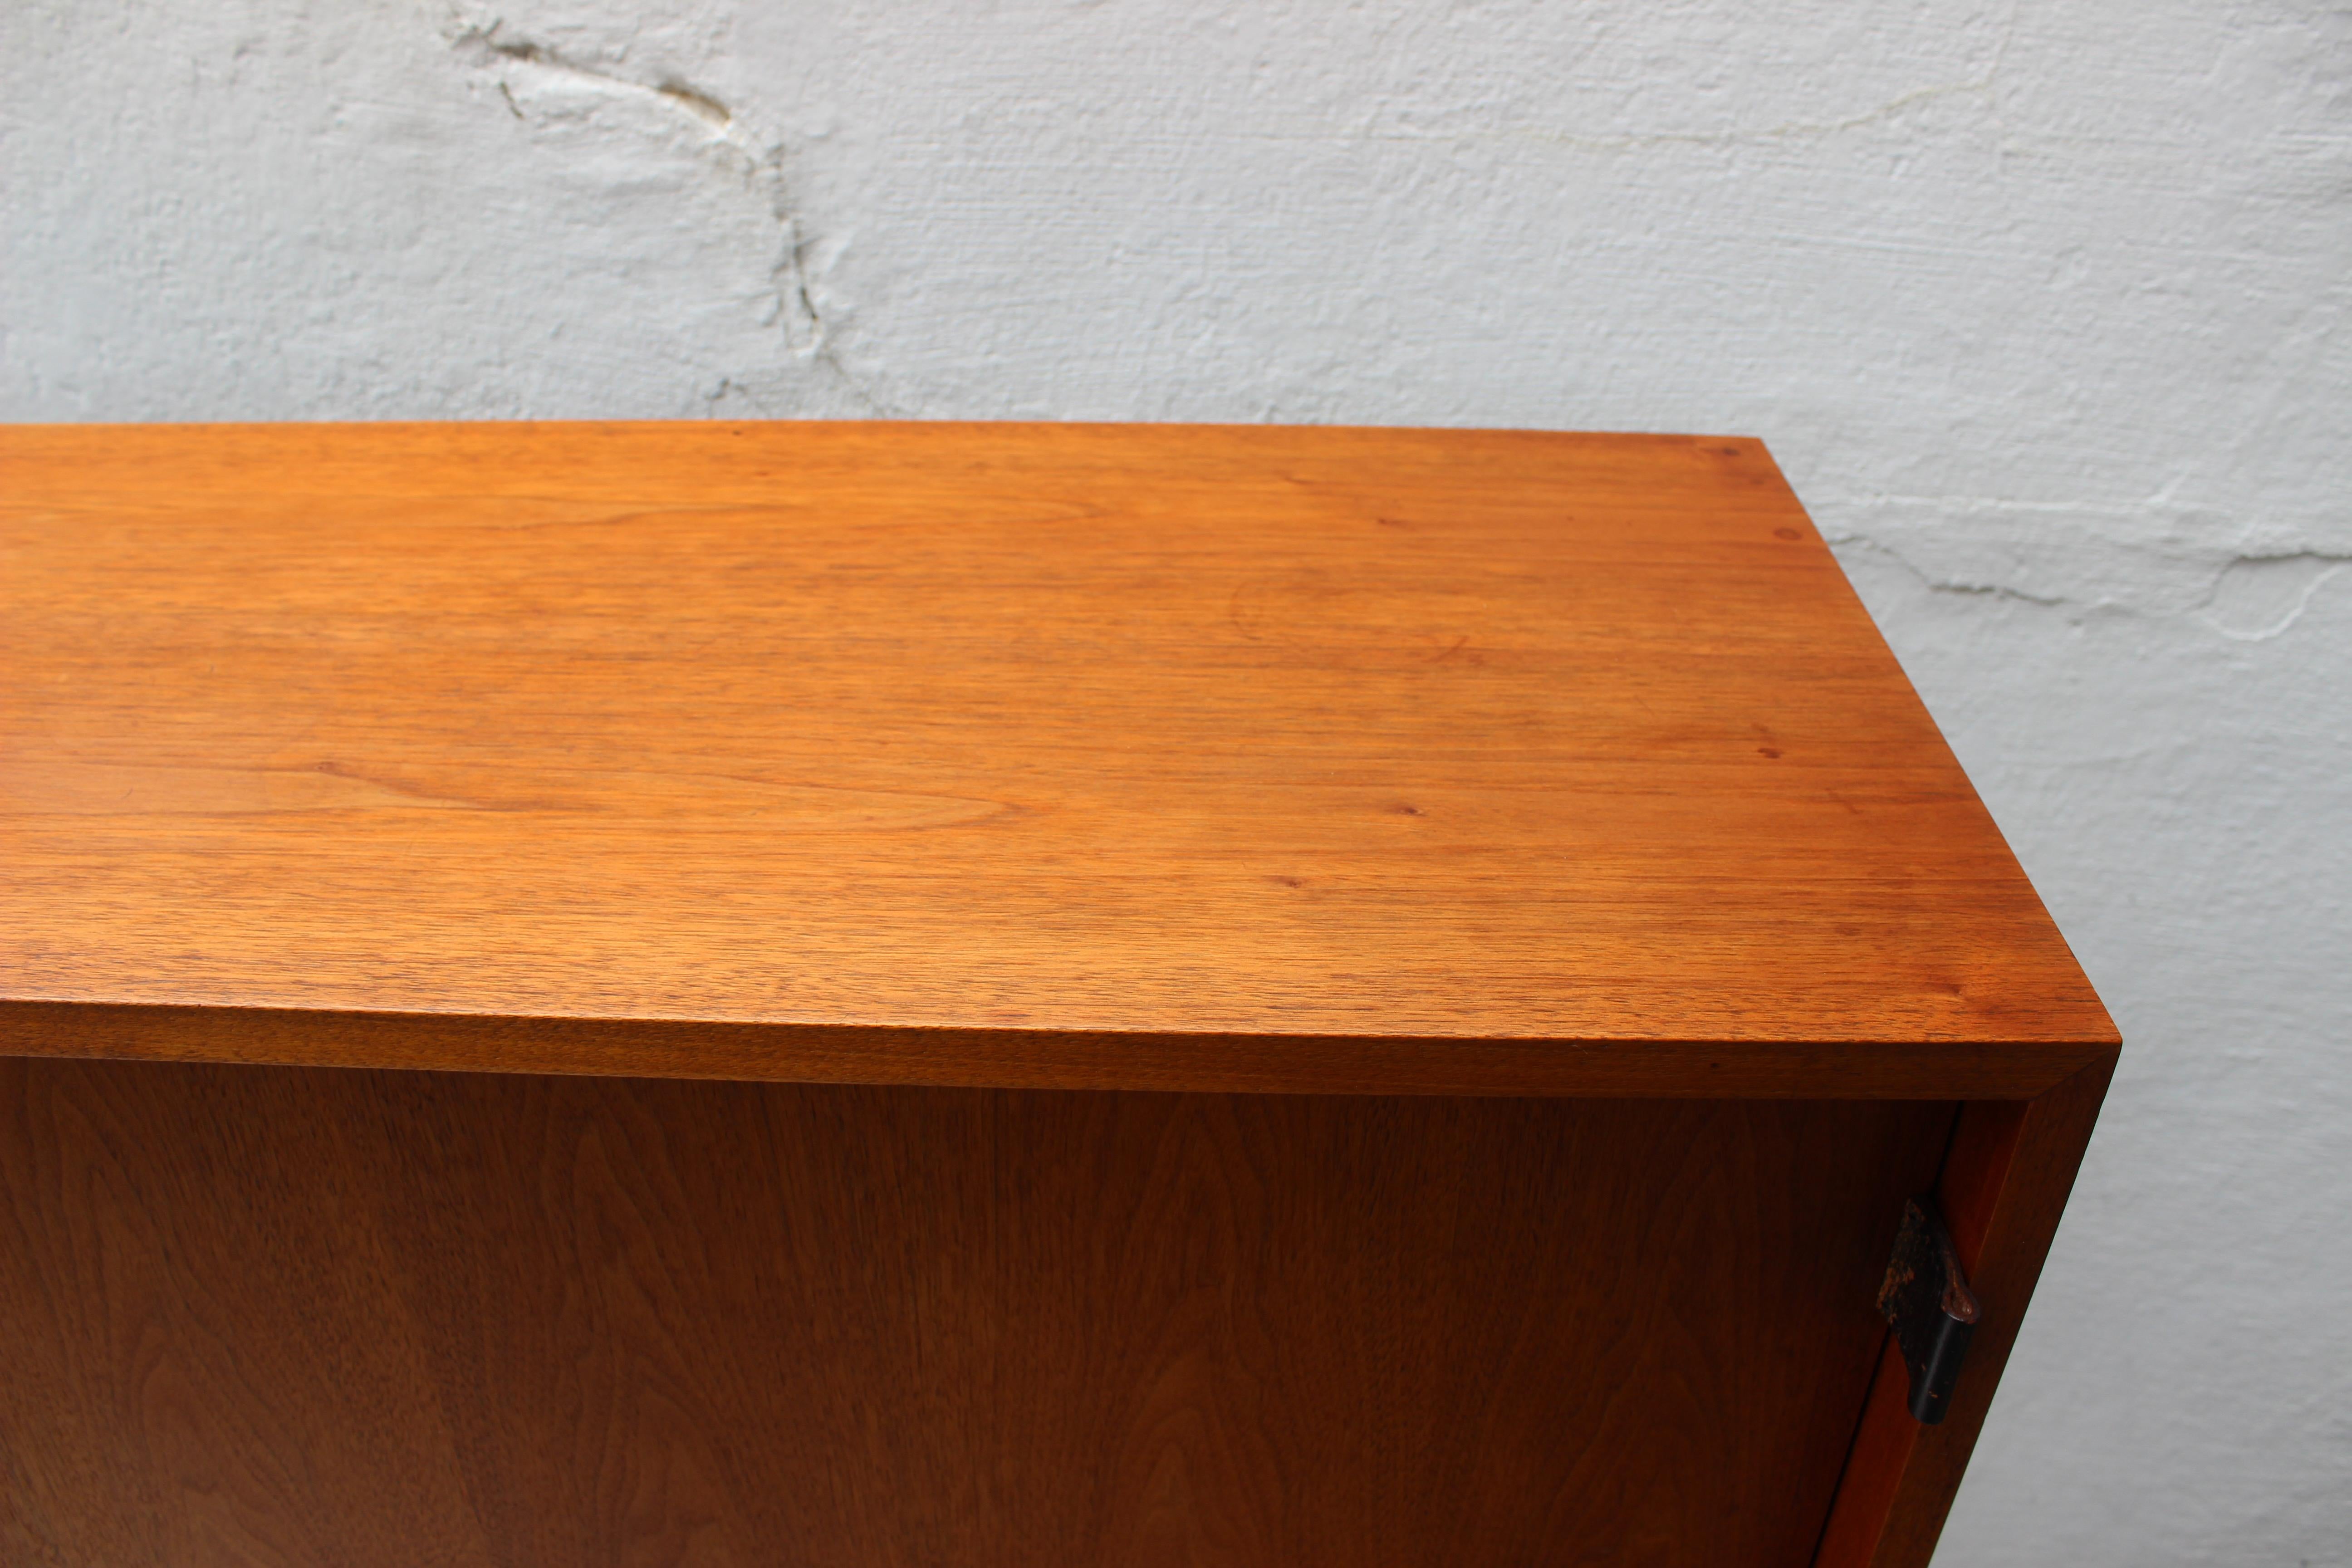 Mid-Century Modern Florence Knoll floating wall mount walnut credenza, sideboard or storage unit.

Label still present on the back of the piece.